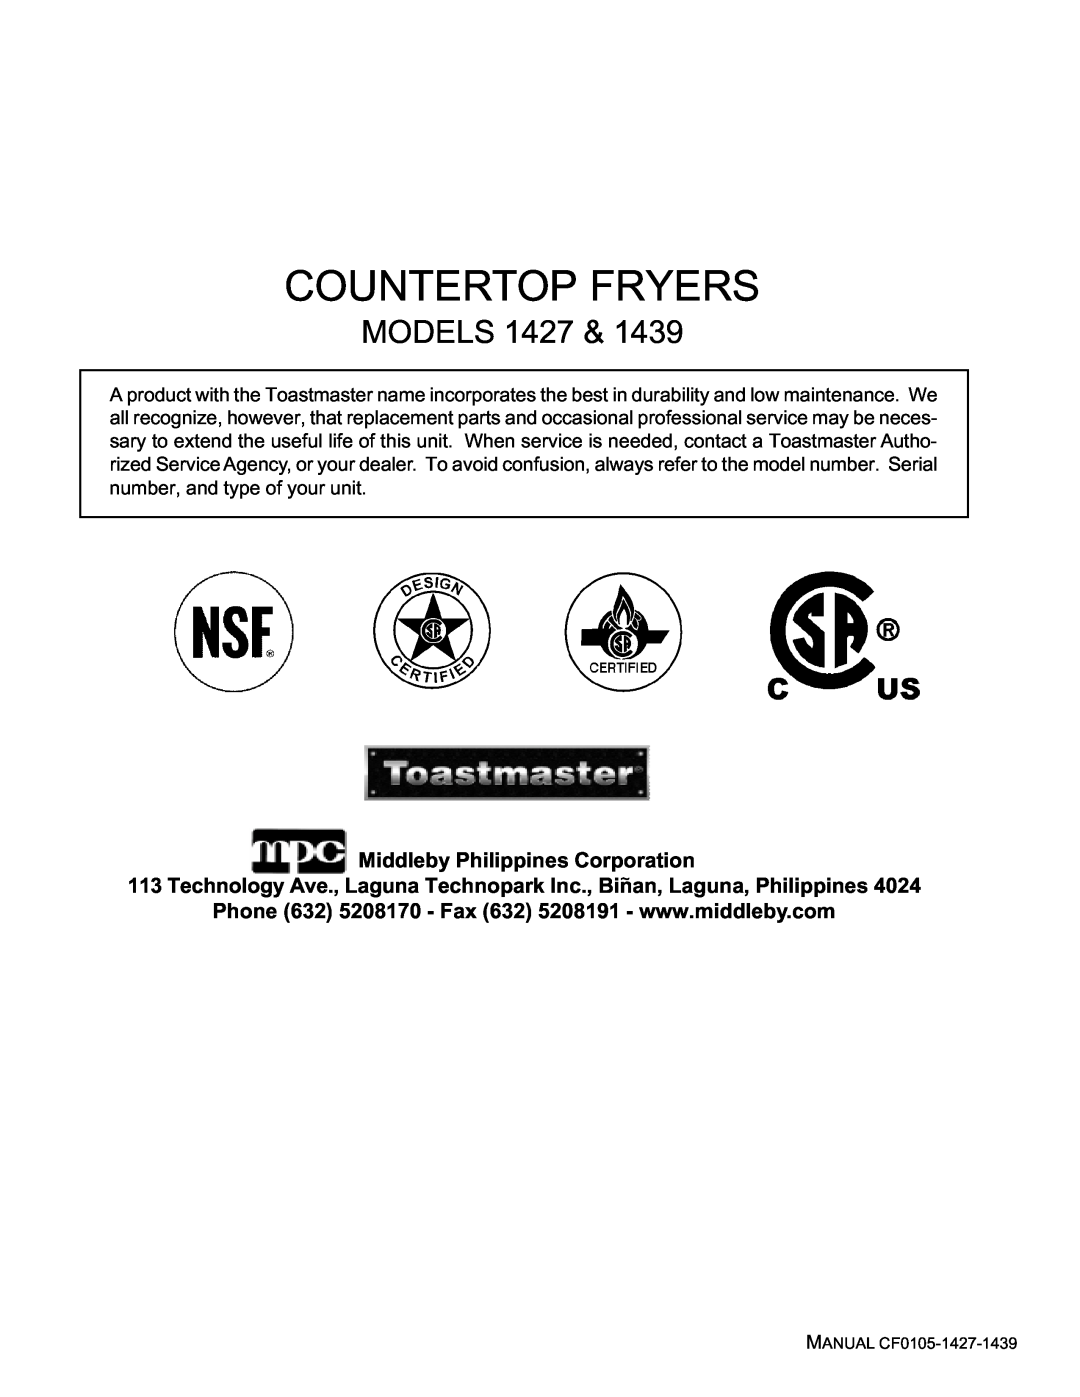 Toastmaster 1439 manual Middleby Philippines Corporation, Countertop Fryers, MODELS 1427 